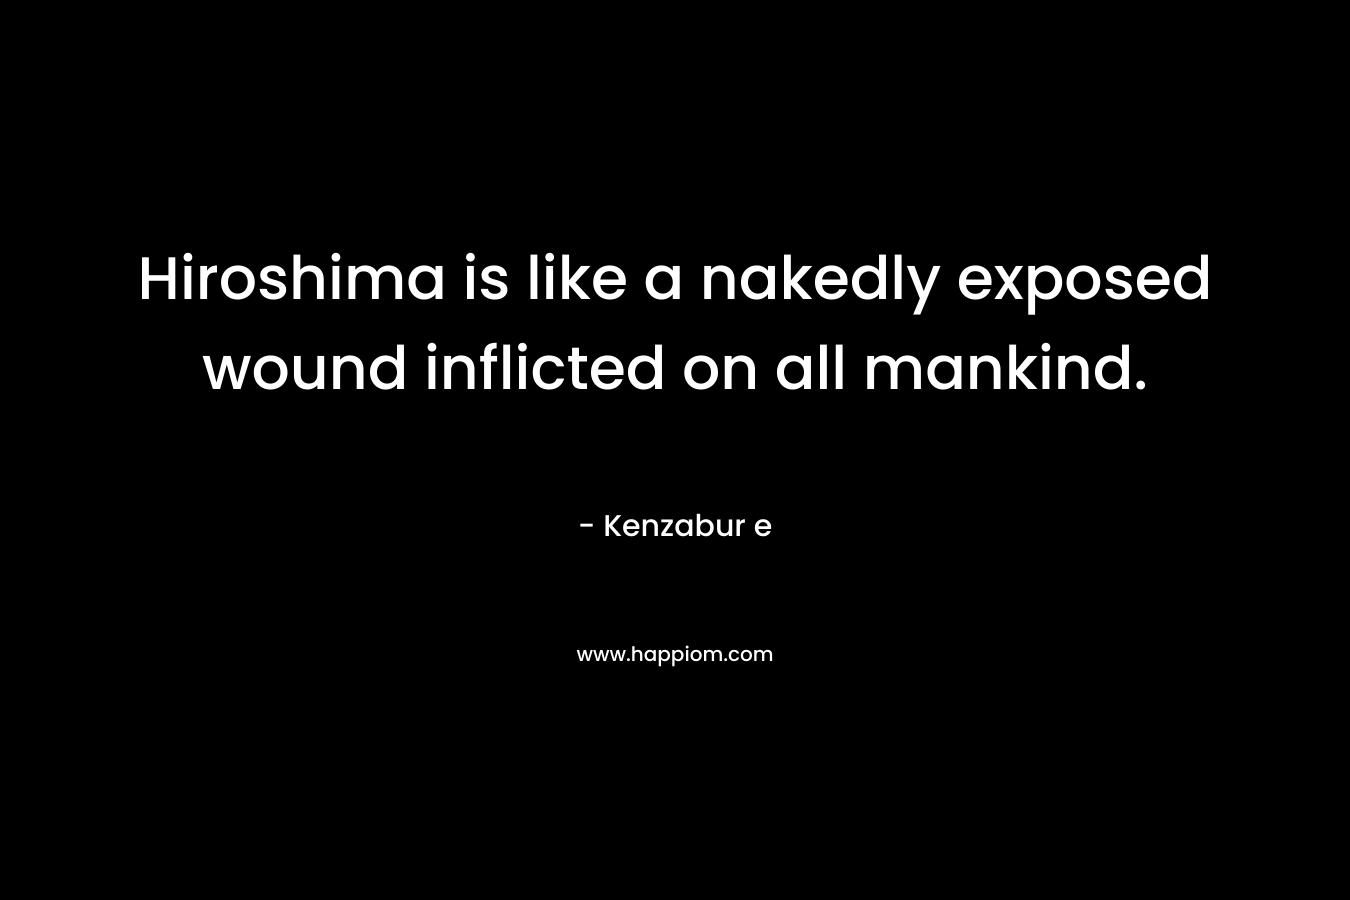 Hiroshima is like a nakedly exposed wound inflicted on all mankind. – Kenzabur e